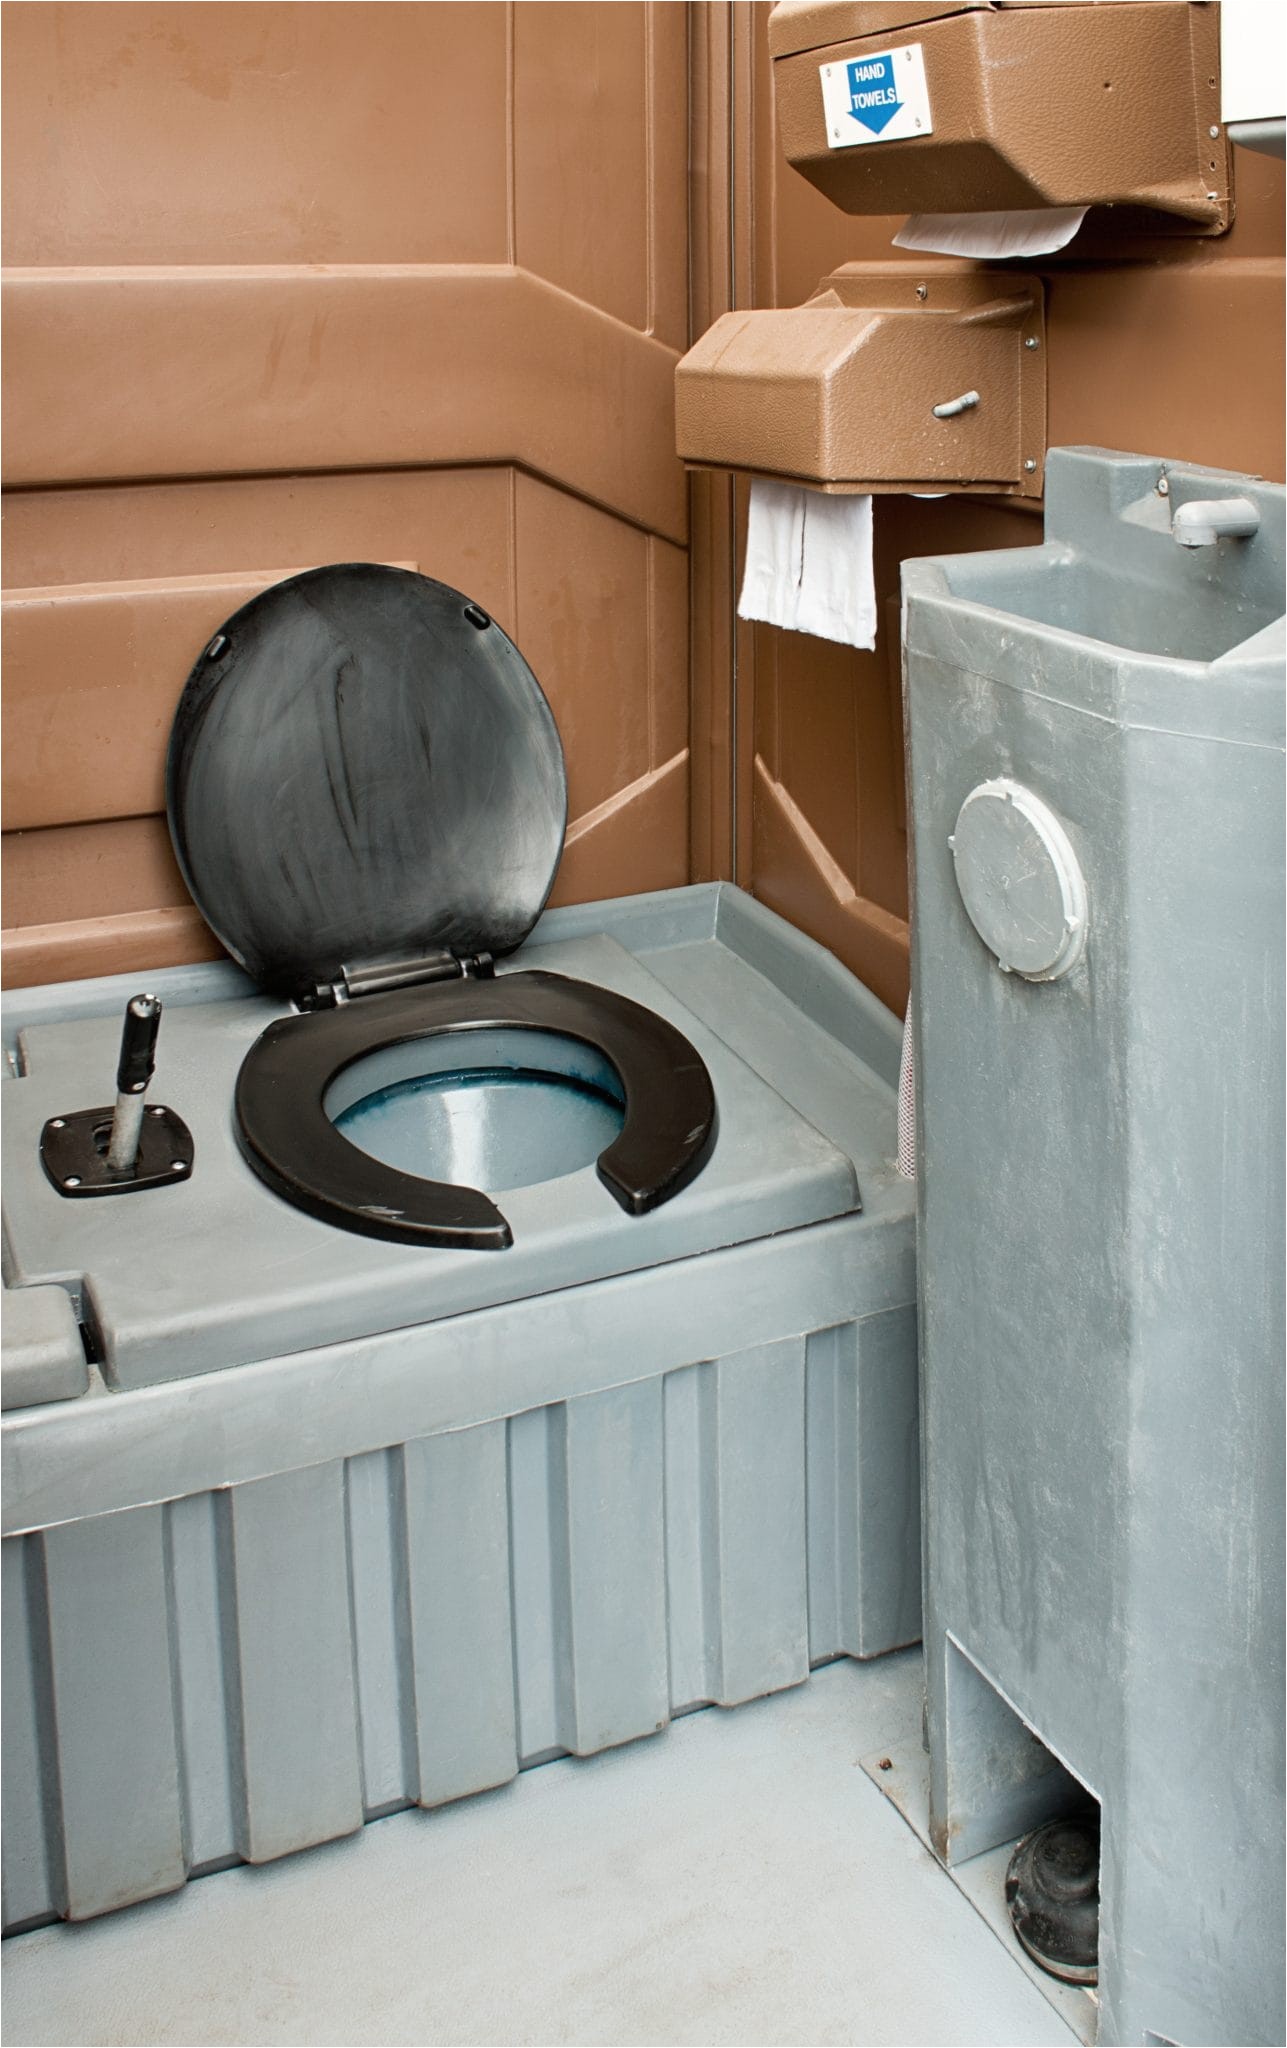 porta john checklist tips when planning sanitation needs for your event